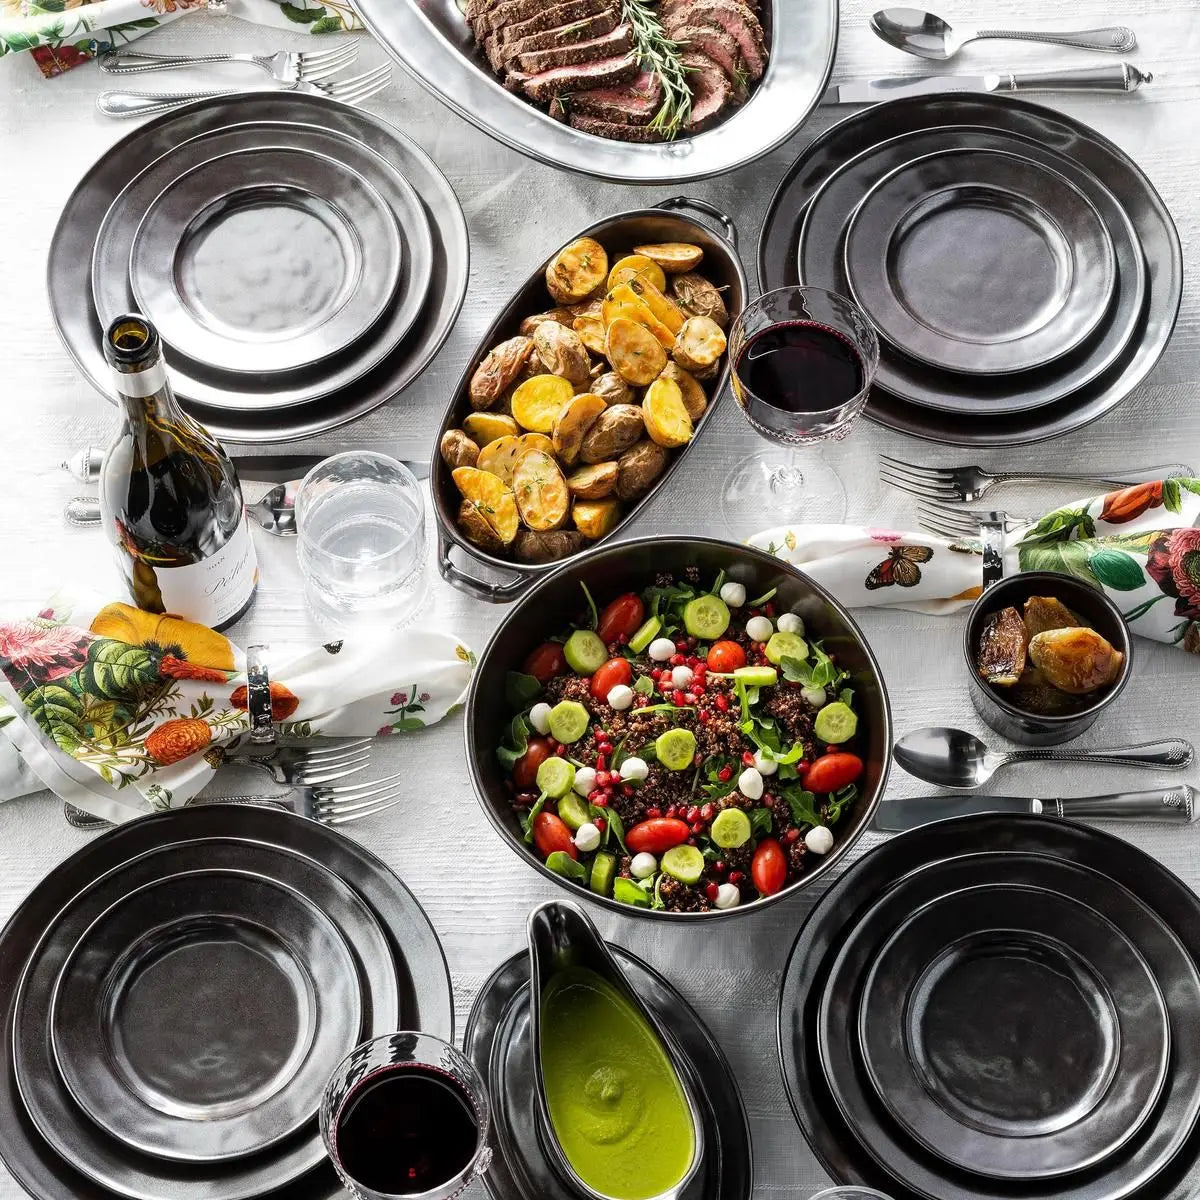 Pewter Stoneware Four-Piece Place Setting